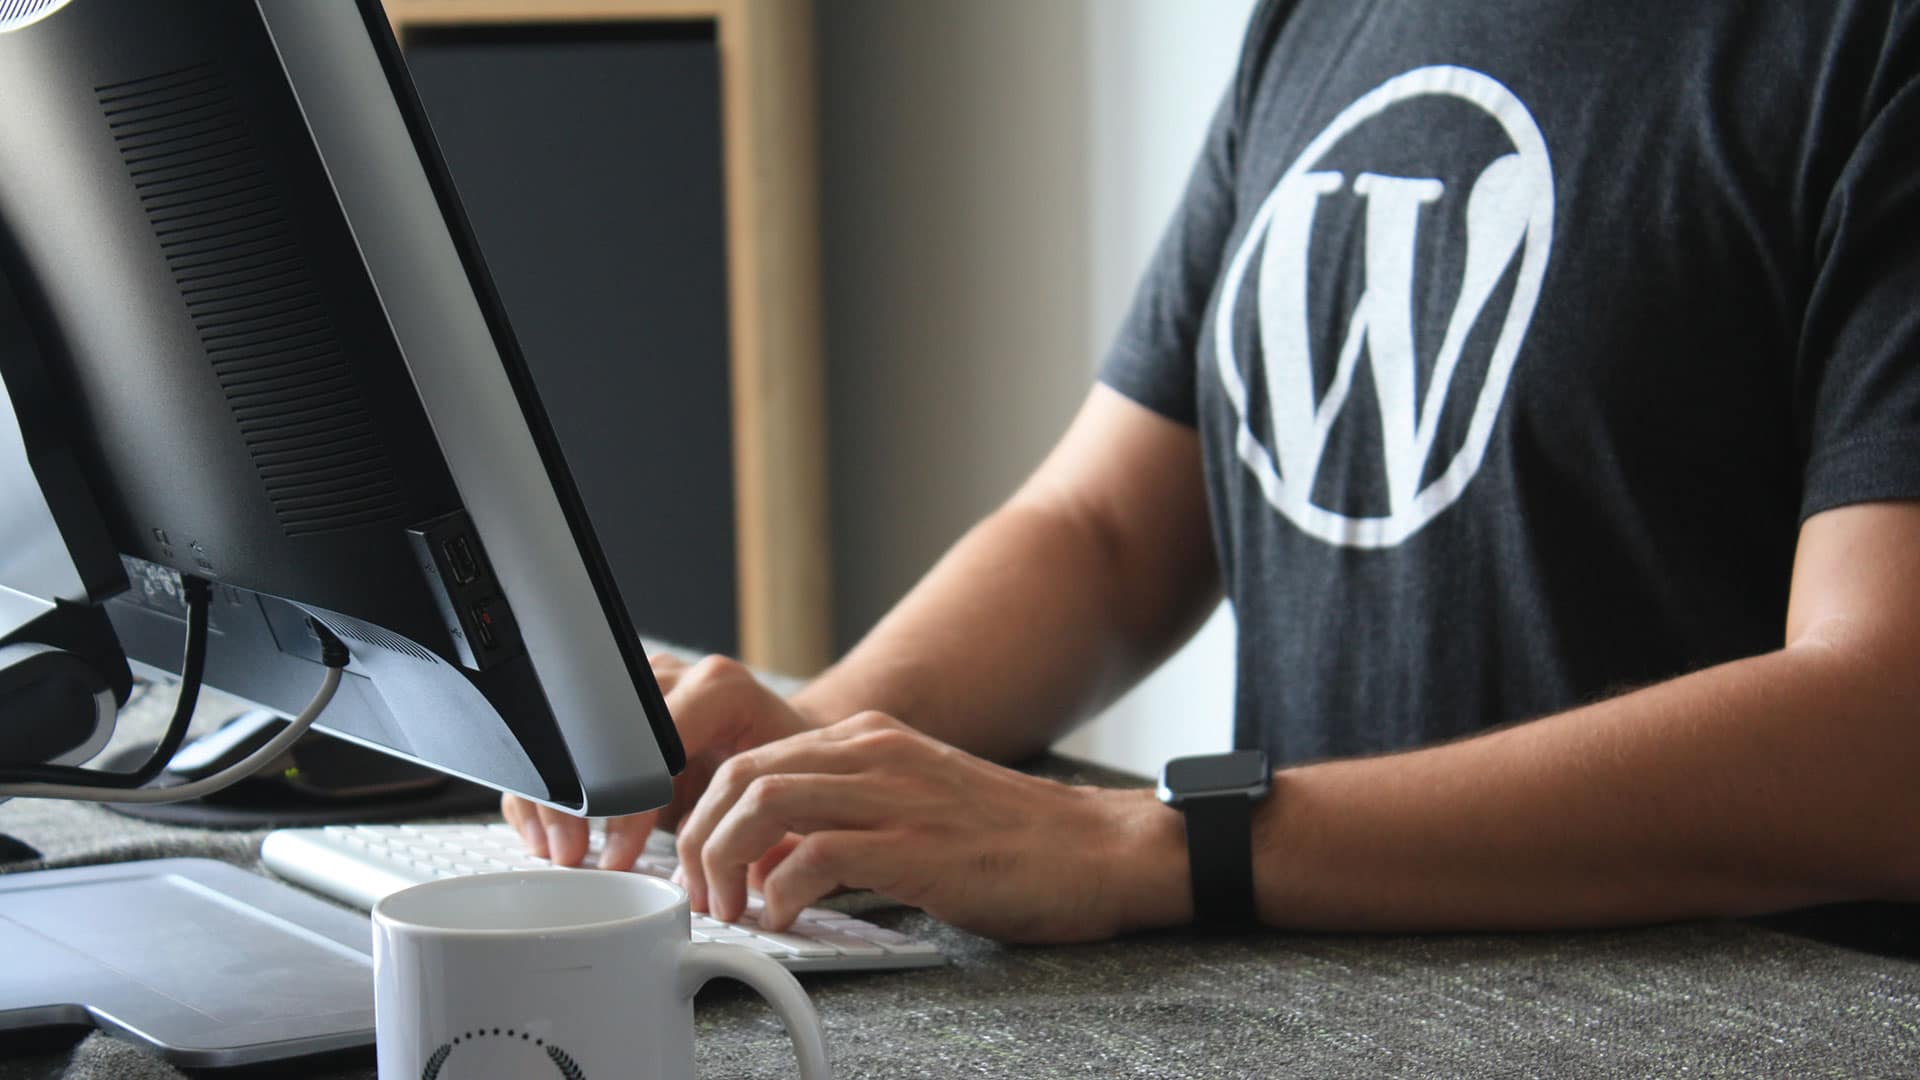 The Guide To Responsive Web Design In Wordpress